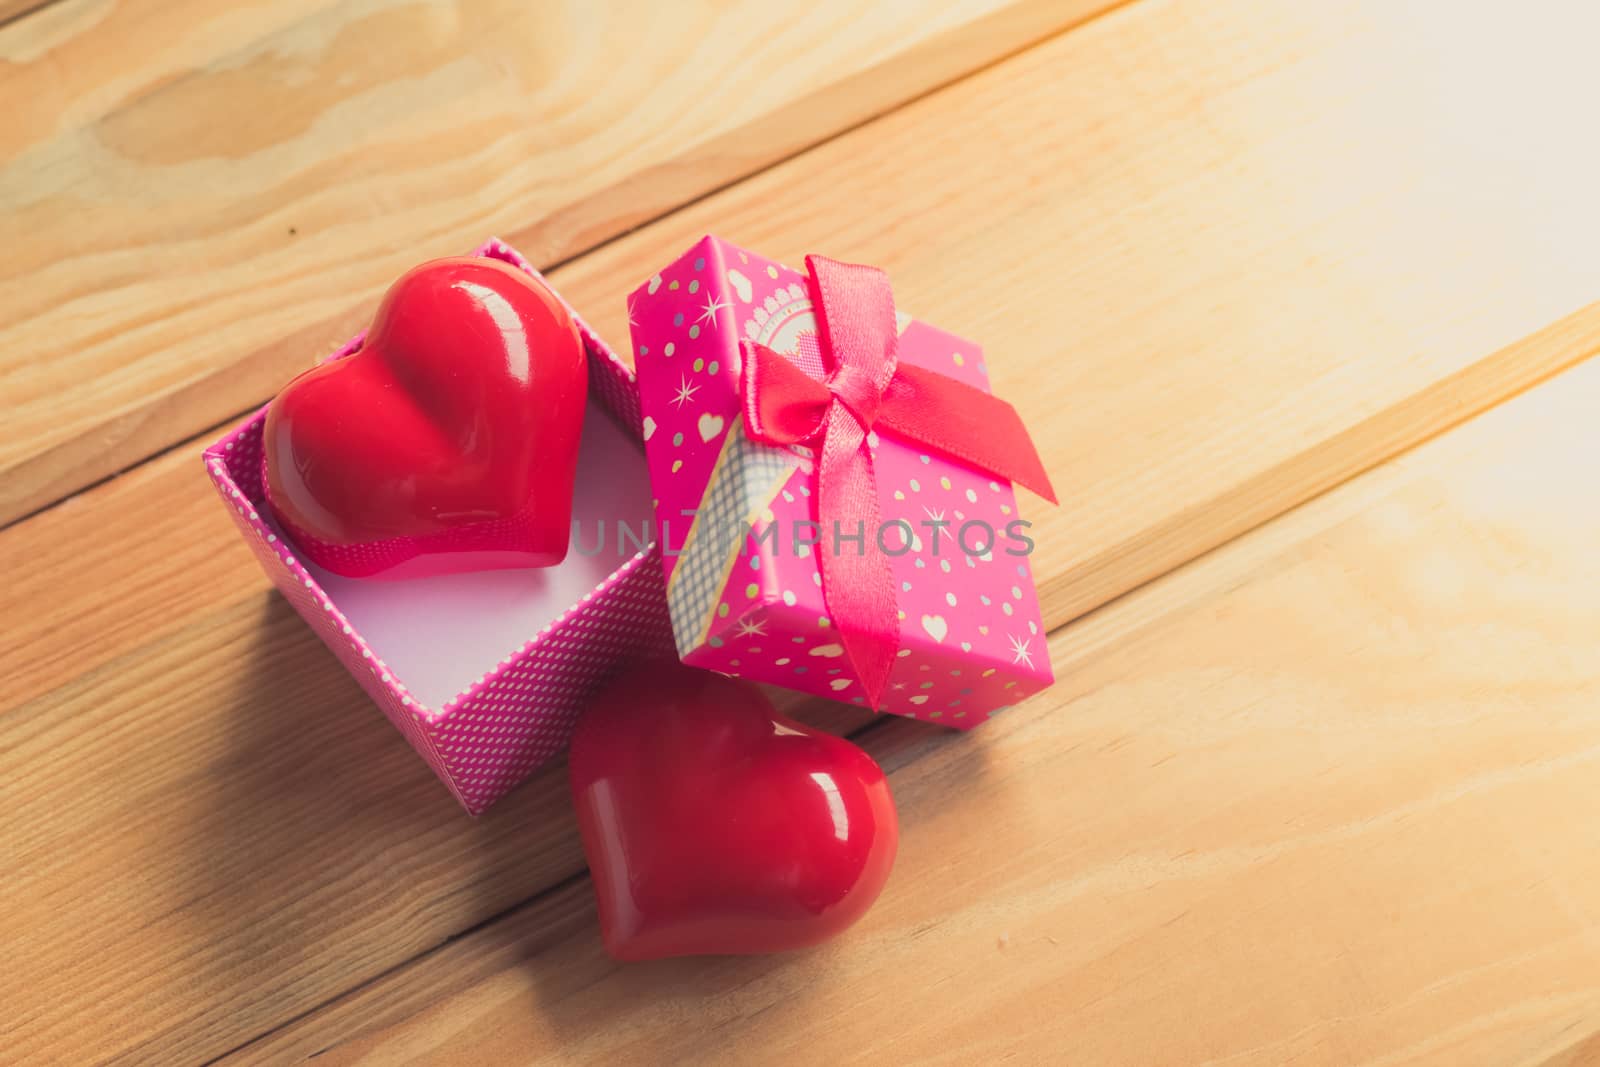 Gift of love. hearty gift. A gift box with a red heart inside. On the wooden floor